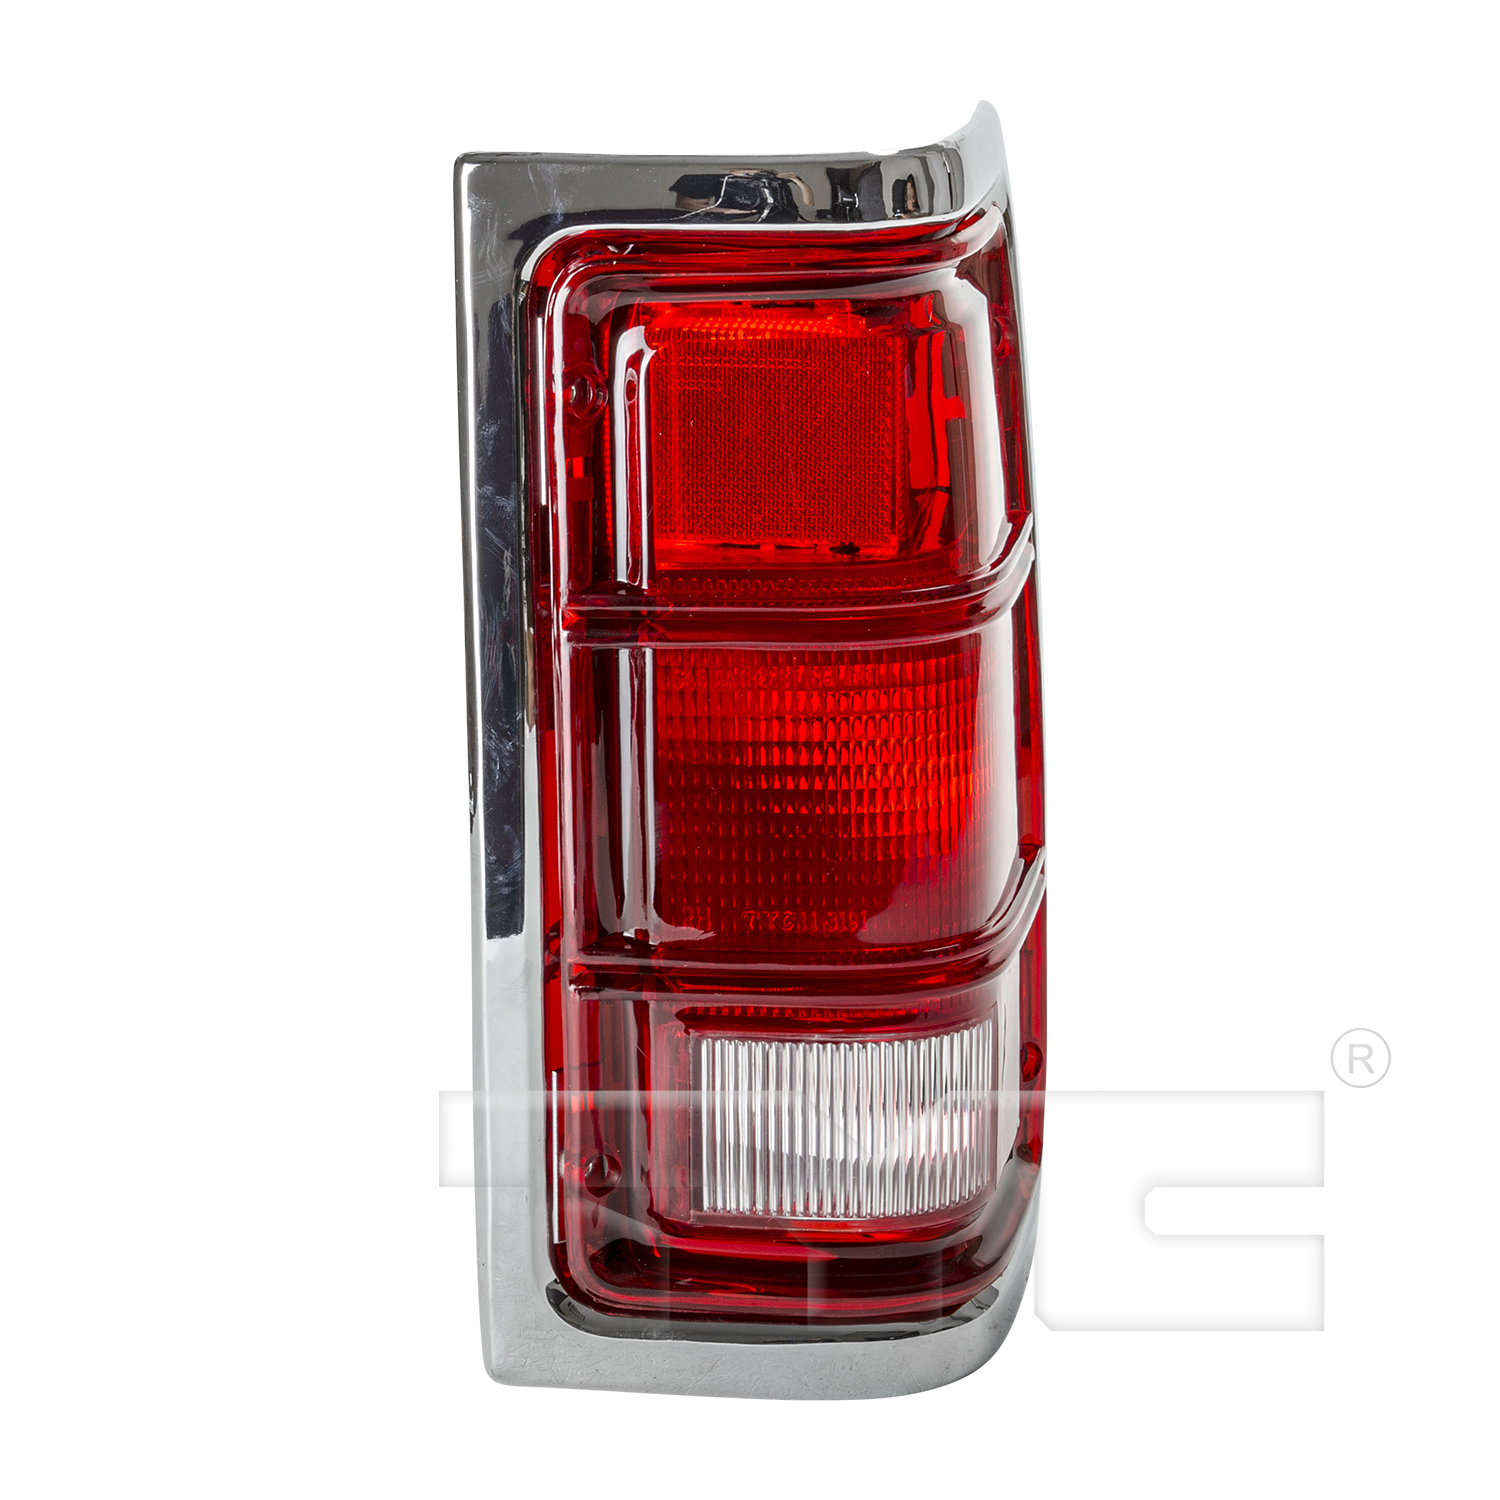 Aftermarket TAILLIGHTS for DODGE - D100, D100,87-89,RT Taillamp lens